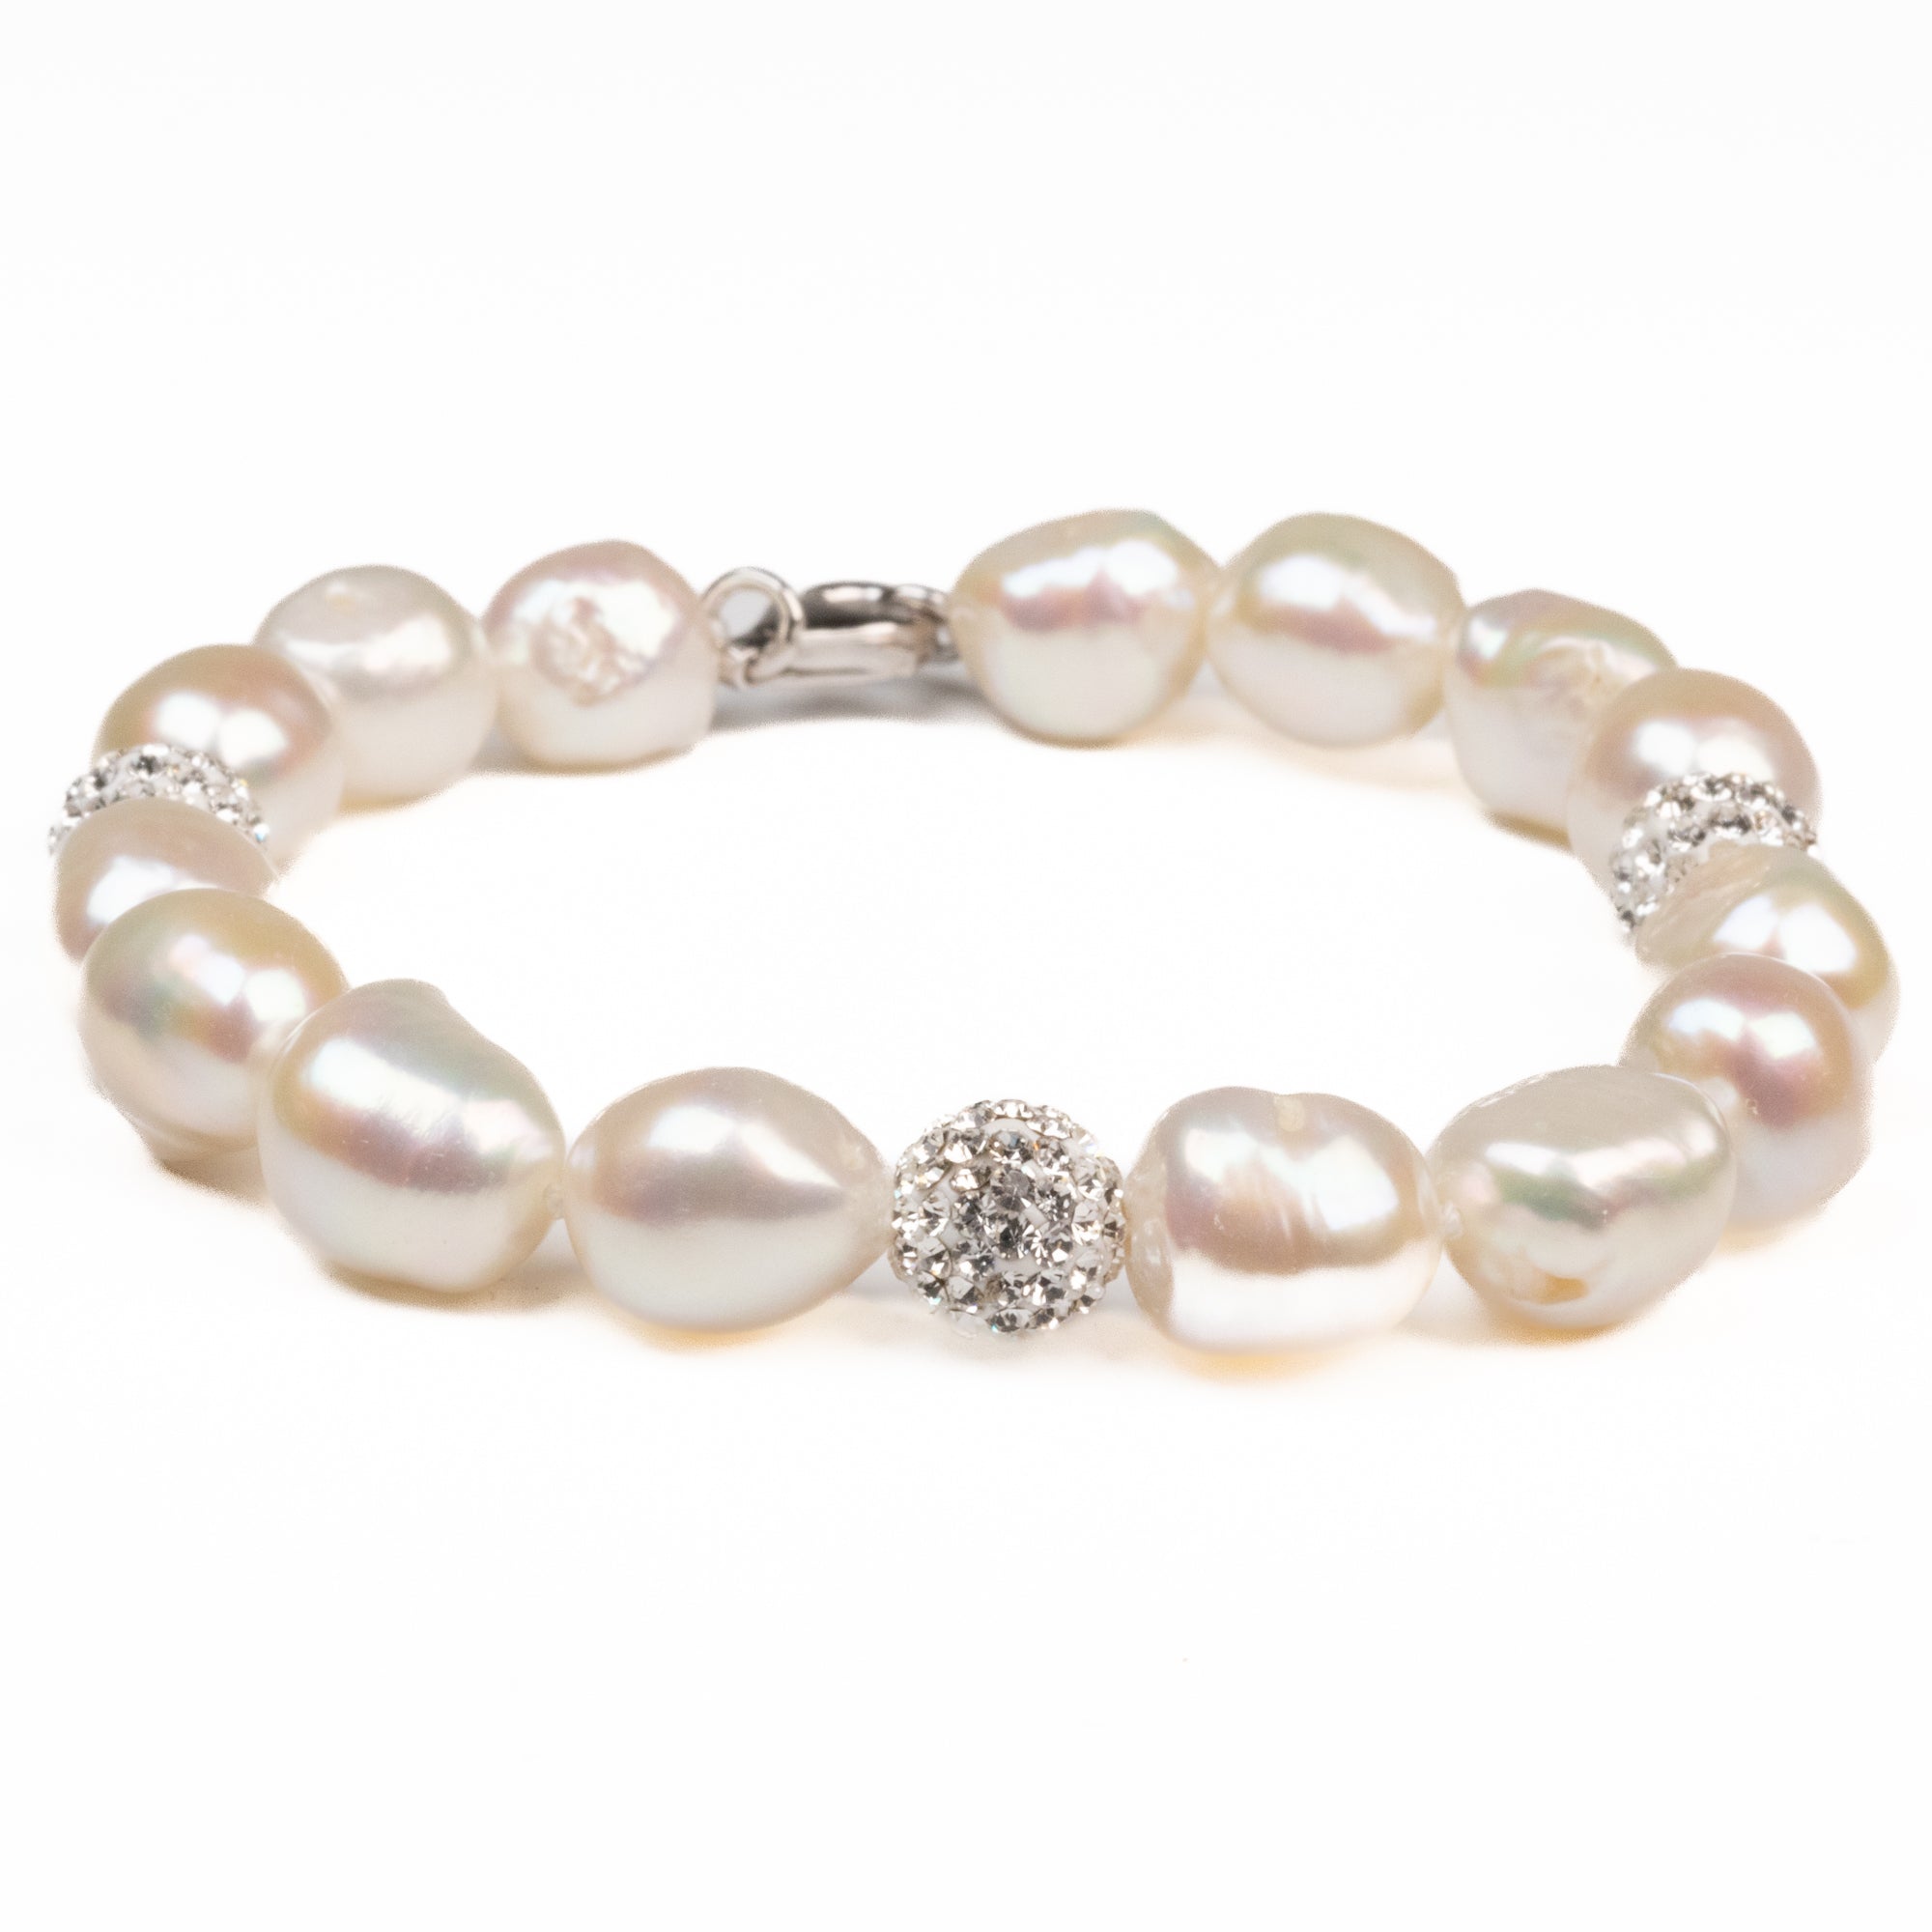 Sterling Silver Freshwater Pearl 9-10mm Bracelet with Crystal Clay Balls